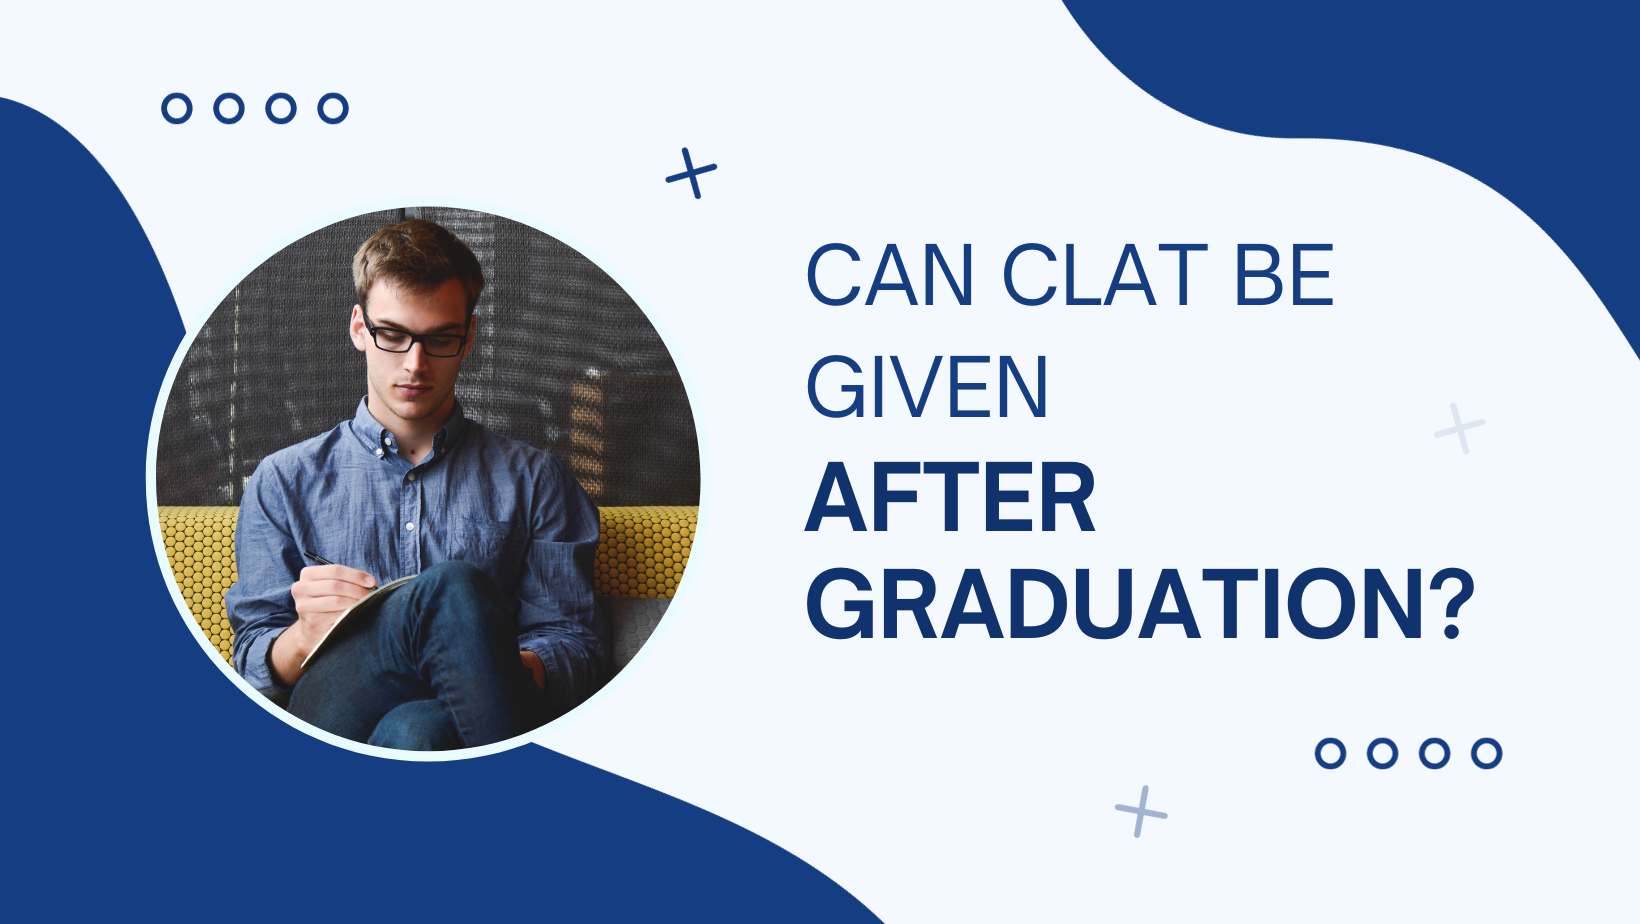 Can CLAT be given after graduation?